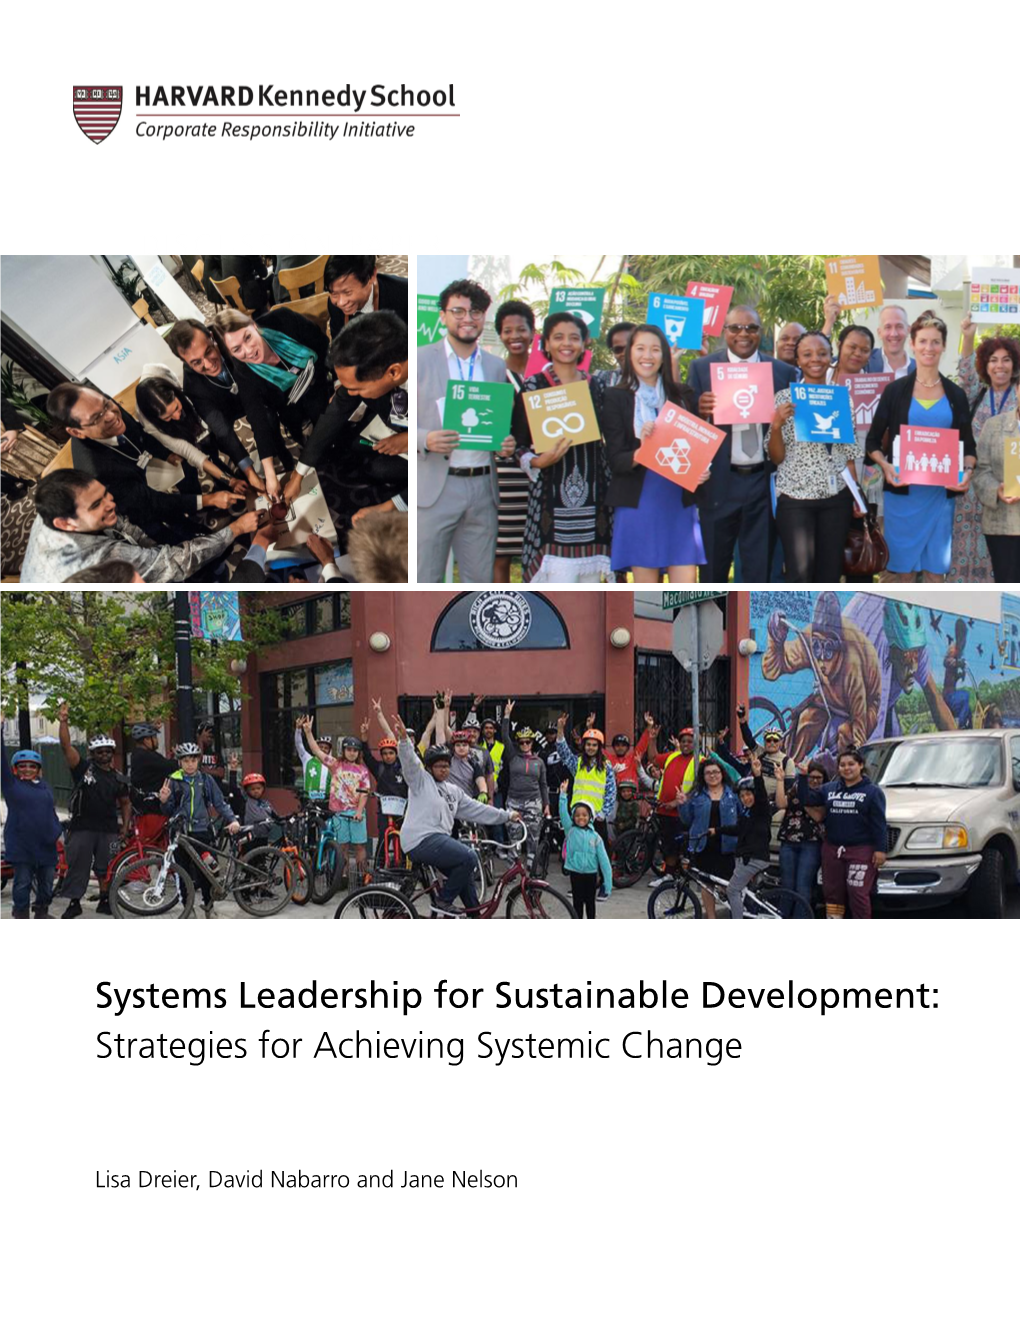 Systems Leadership for Sustainable Development: Strategies for Achieving Systemic Change